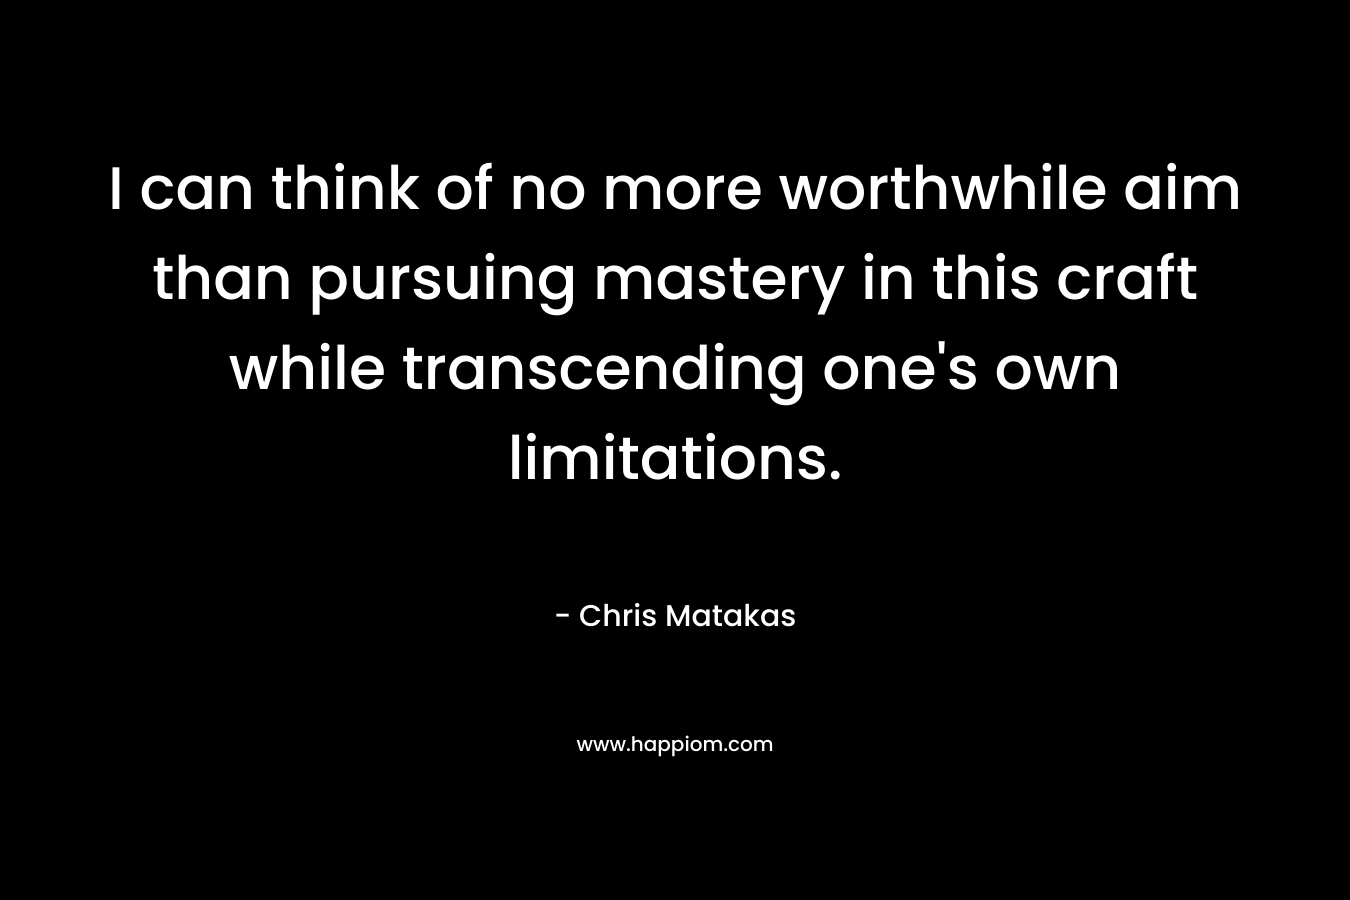 I can think of no more worthwhile aim than pursuing mastery in this craft while transcending one’s own limitations. – Chris Matakas